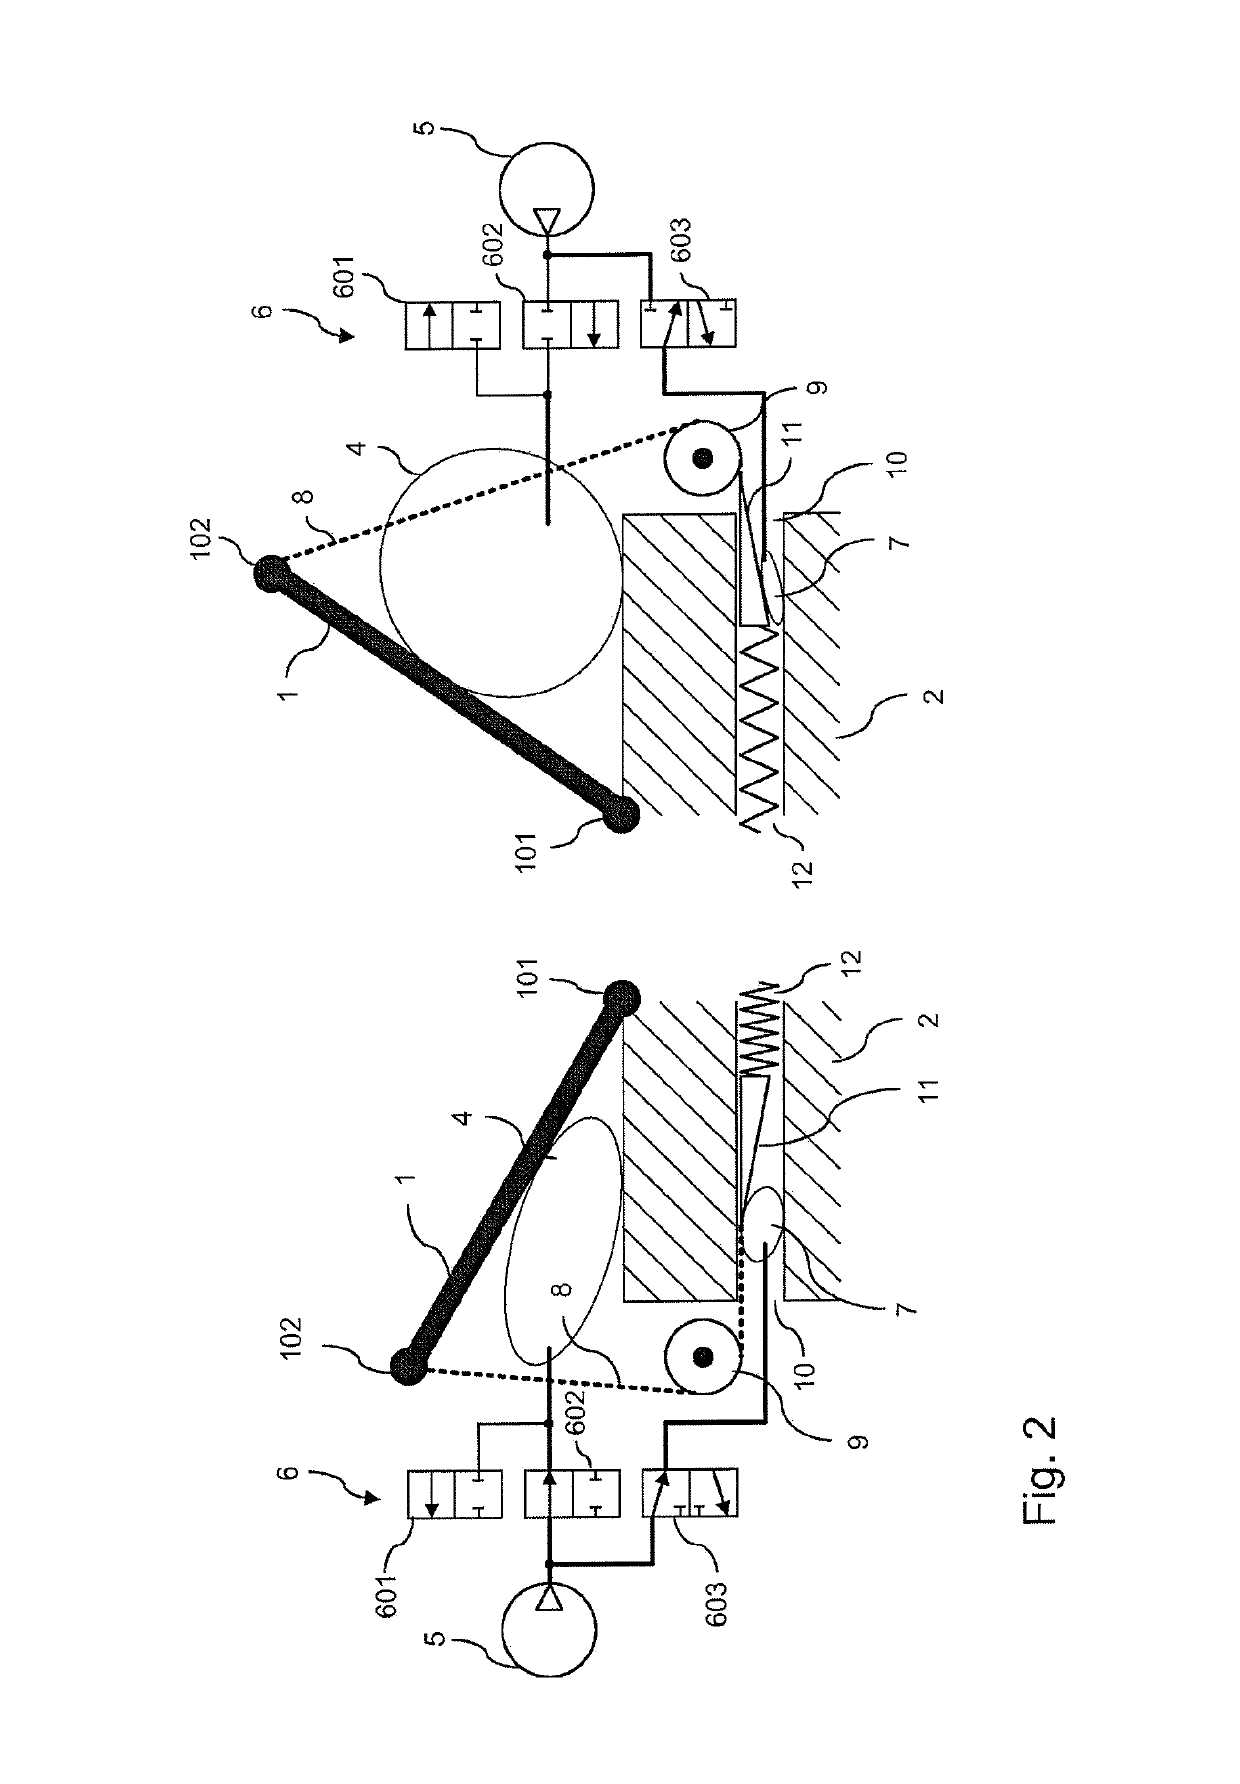 Device for pneumatically adjusting a seat in a transport means, in particular a motor vehicle